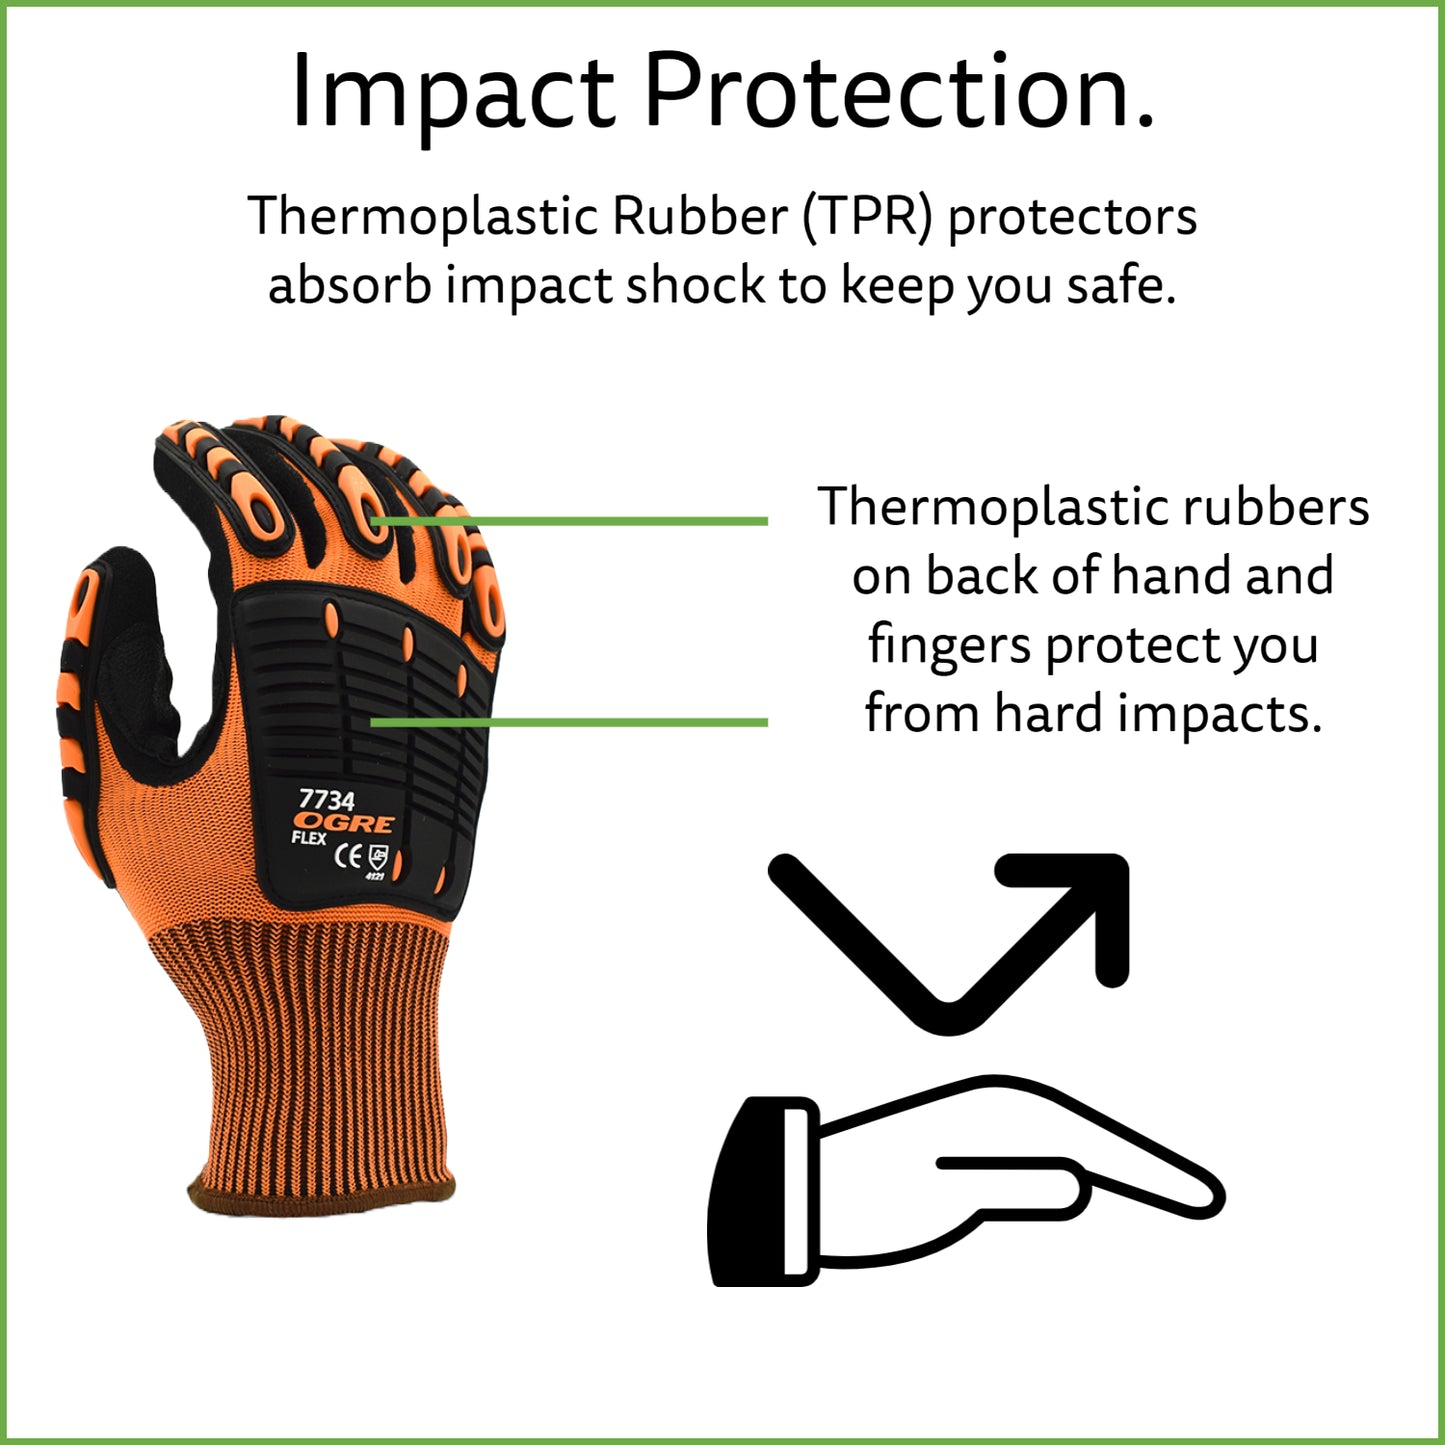 High-Visibility Impact Gloves